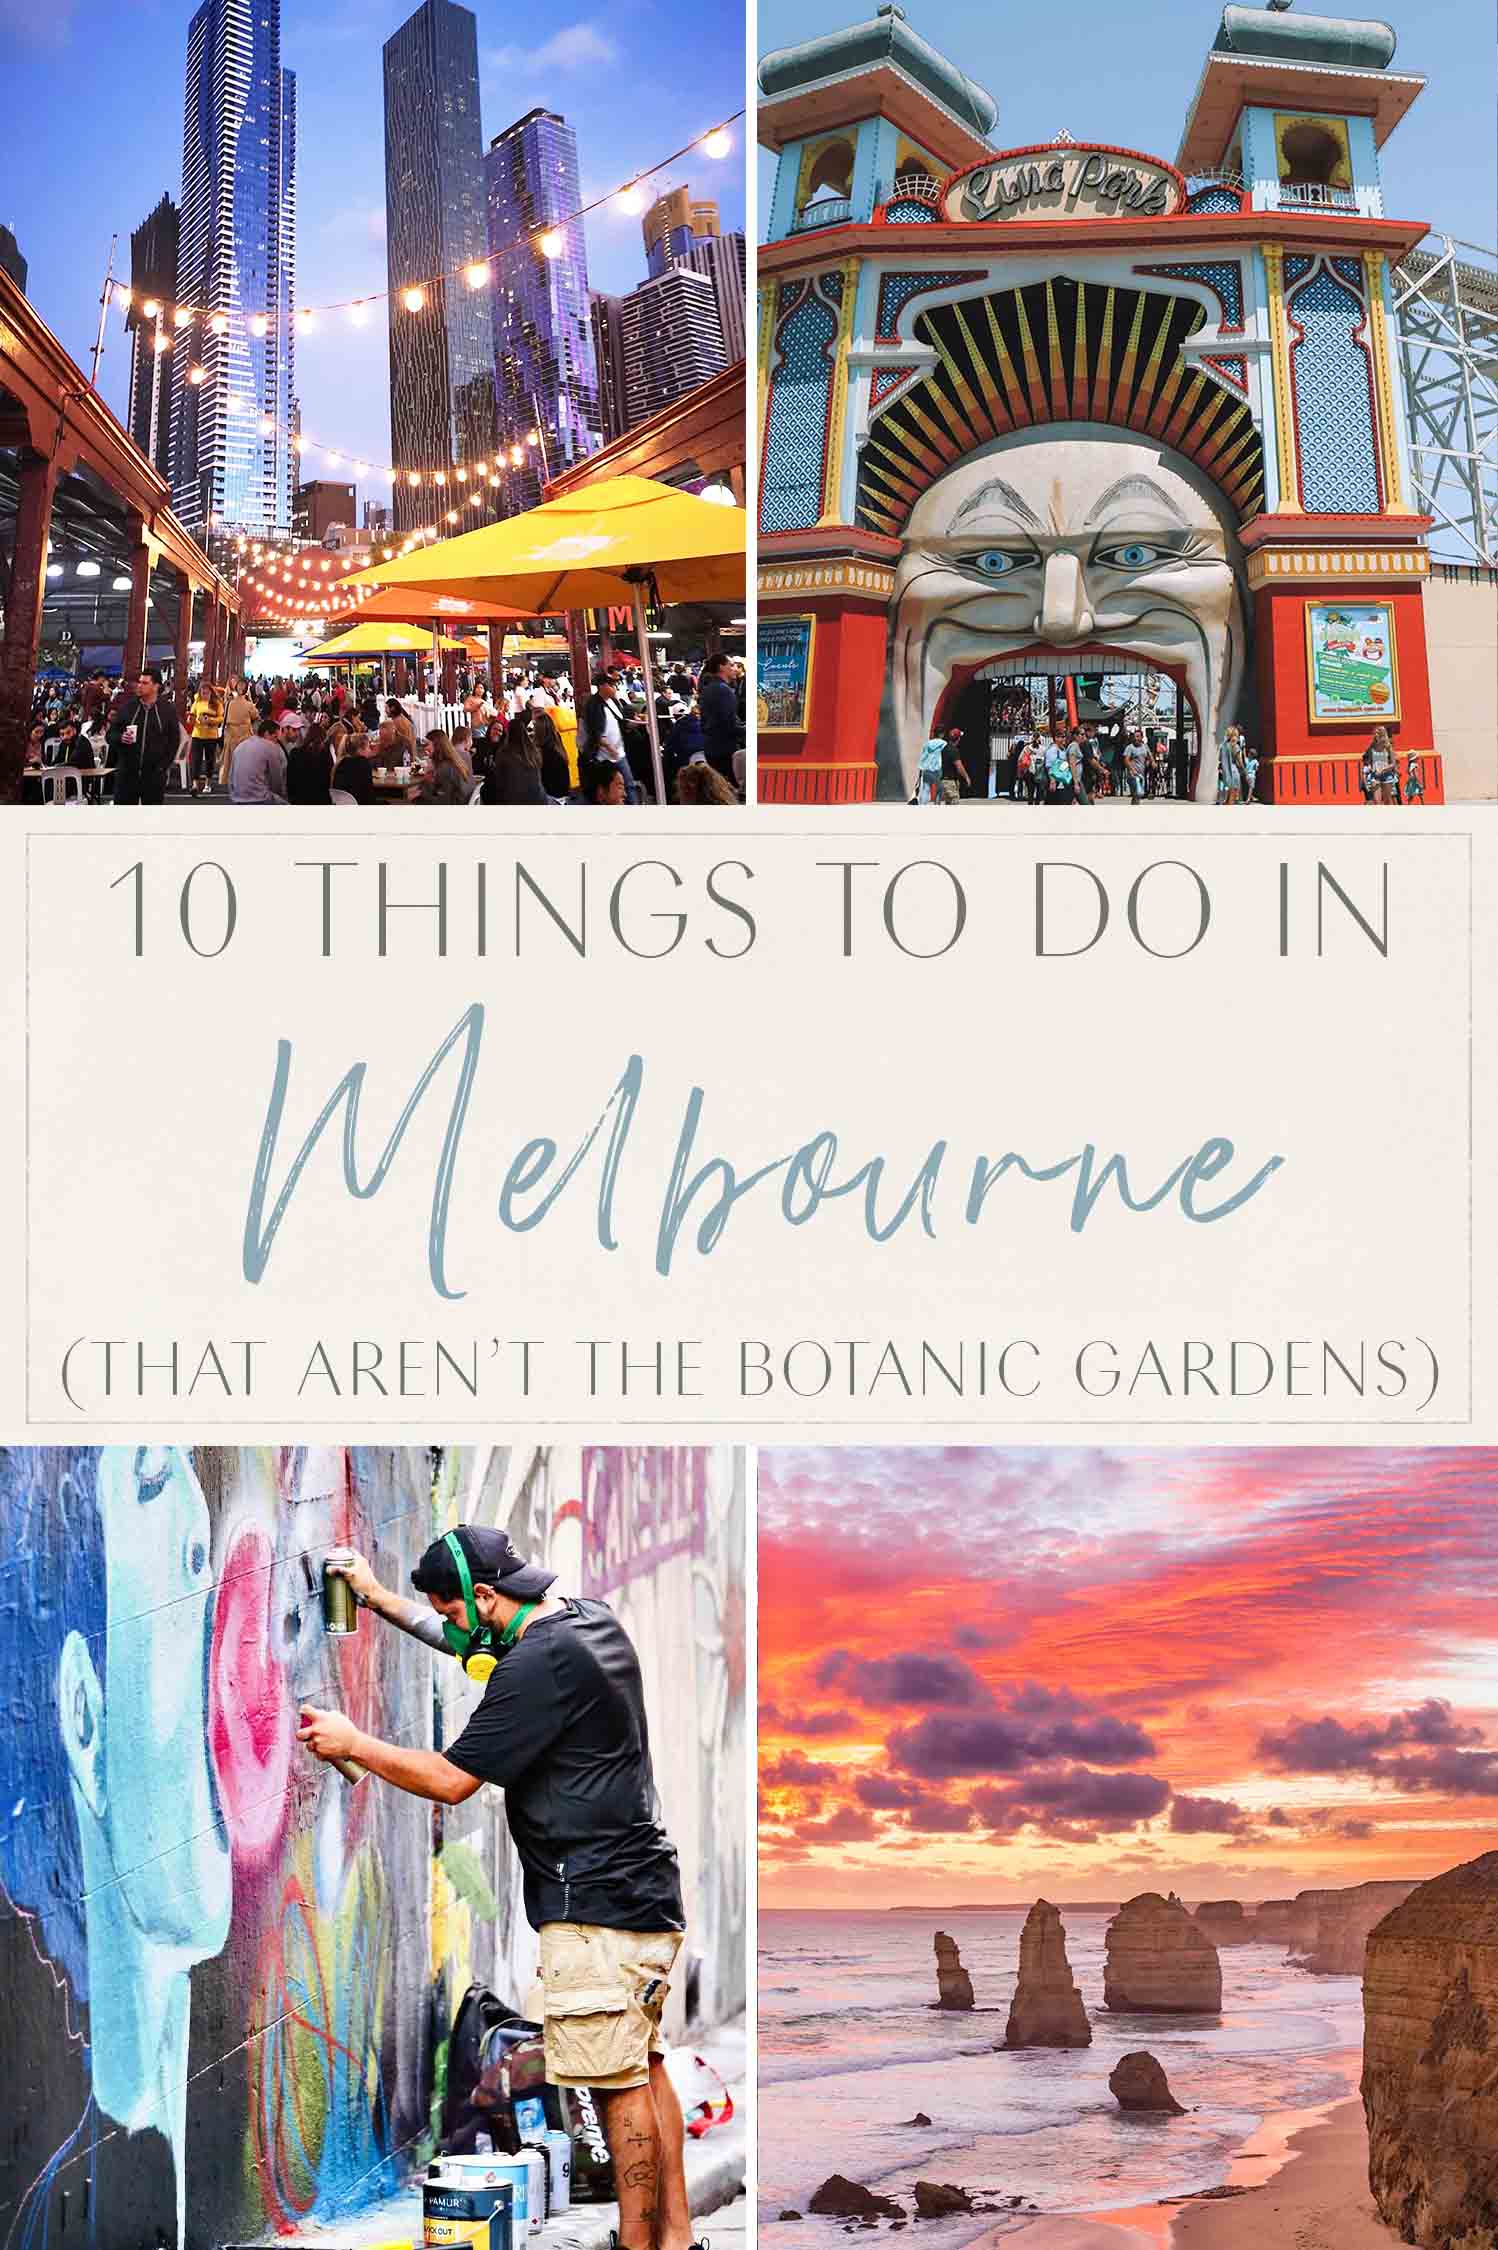 10 Things to do in melbourne